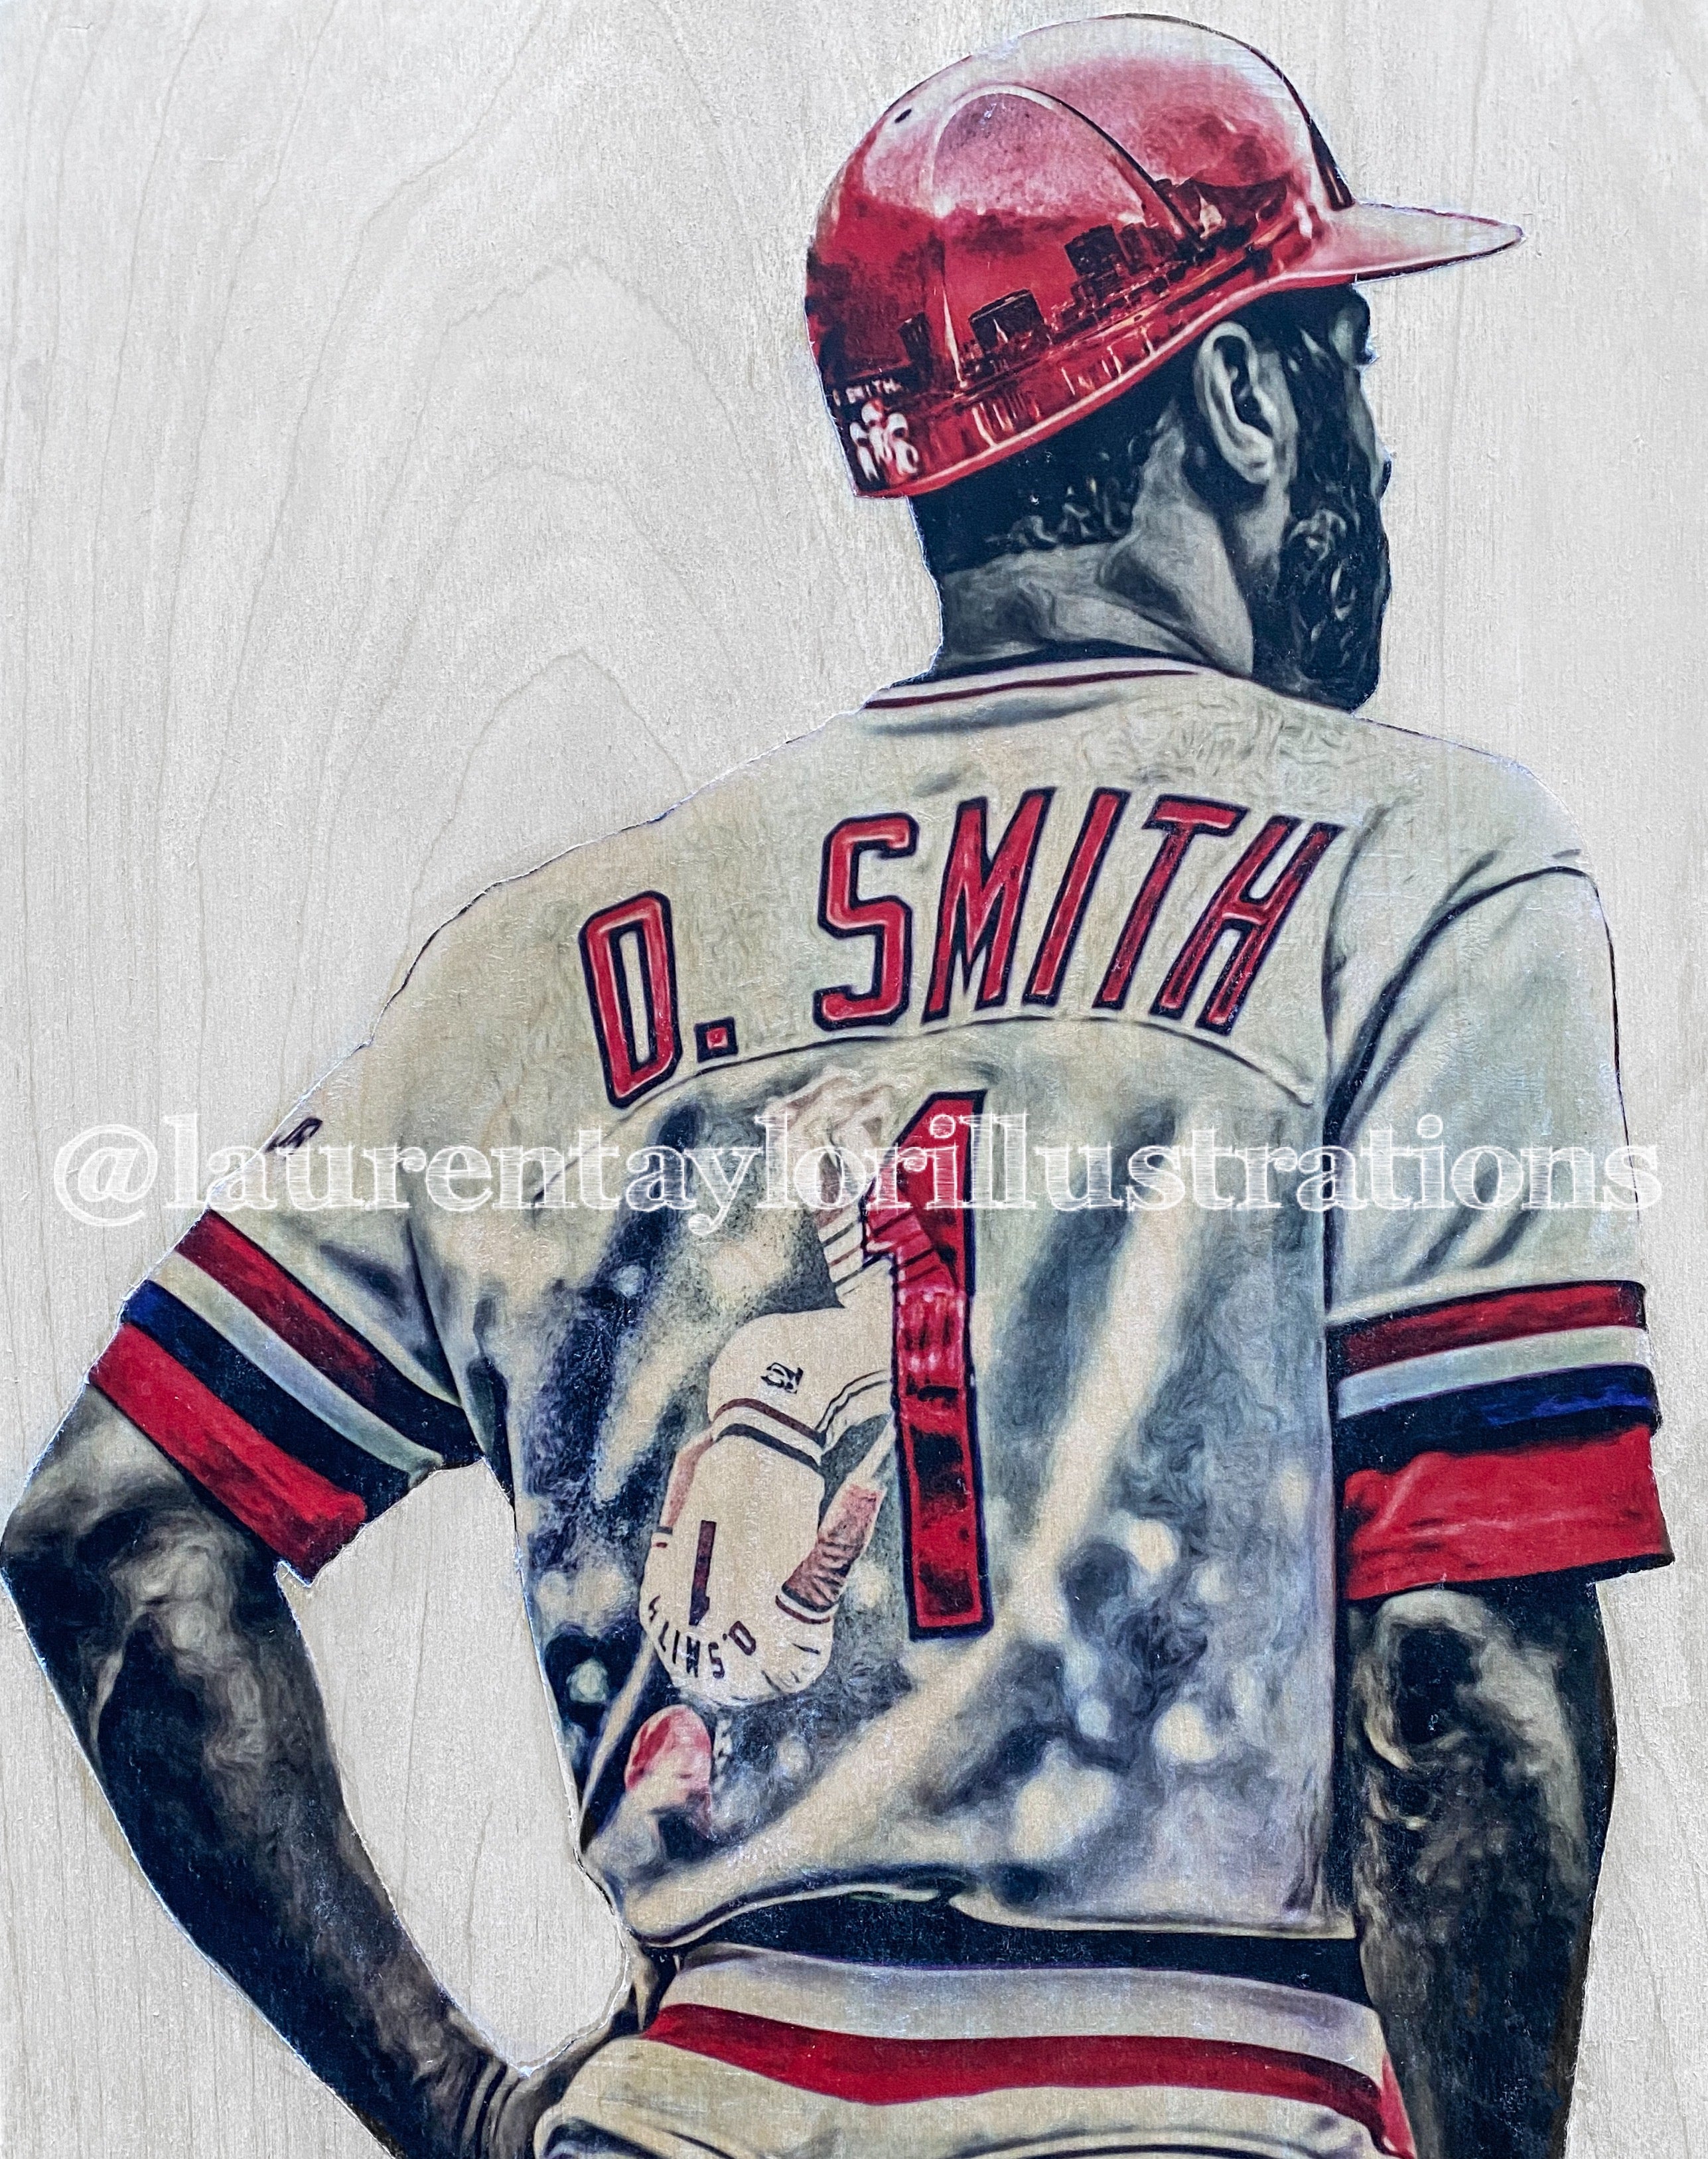 "The Wizard" (Ozzie Smith) St. Louis Cardinals - 1/1 Original on Wood